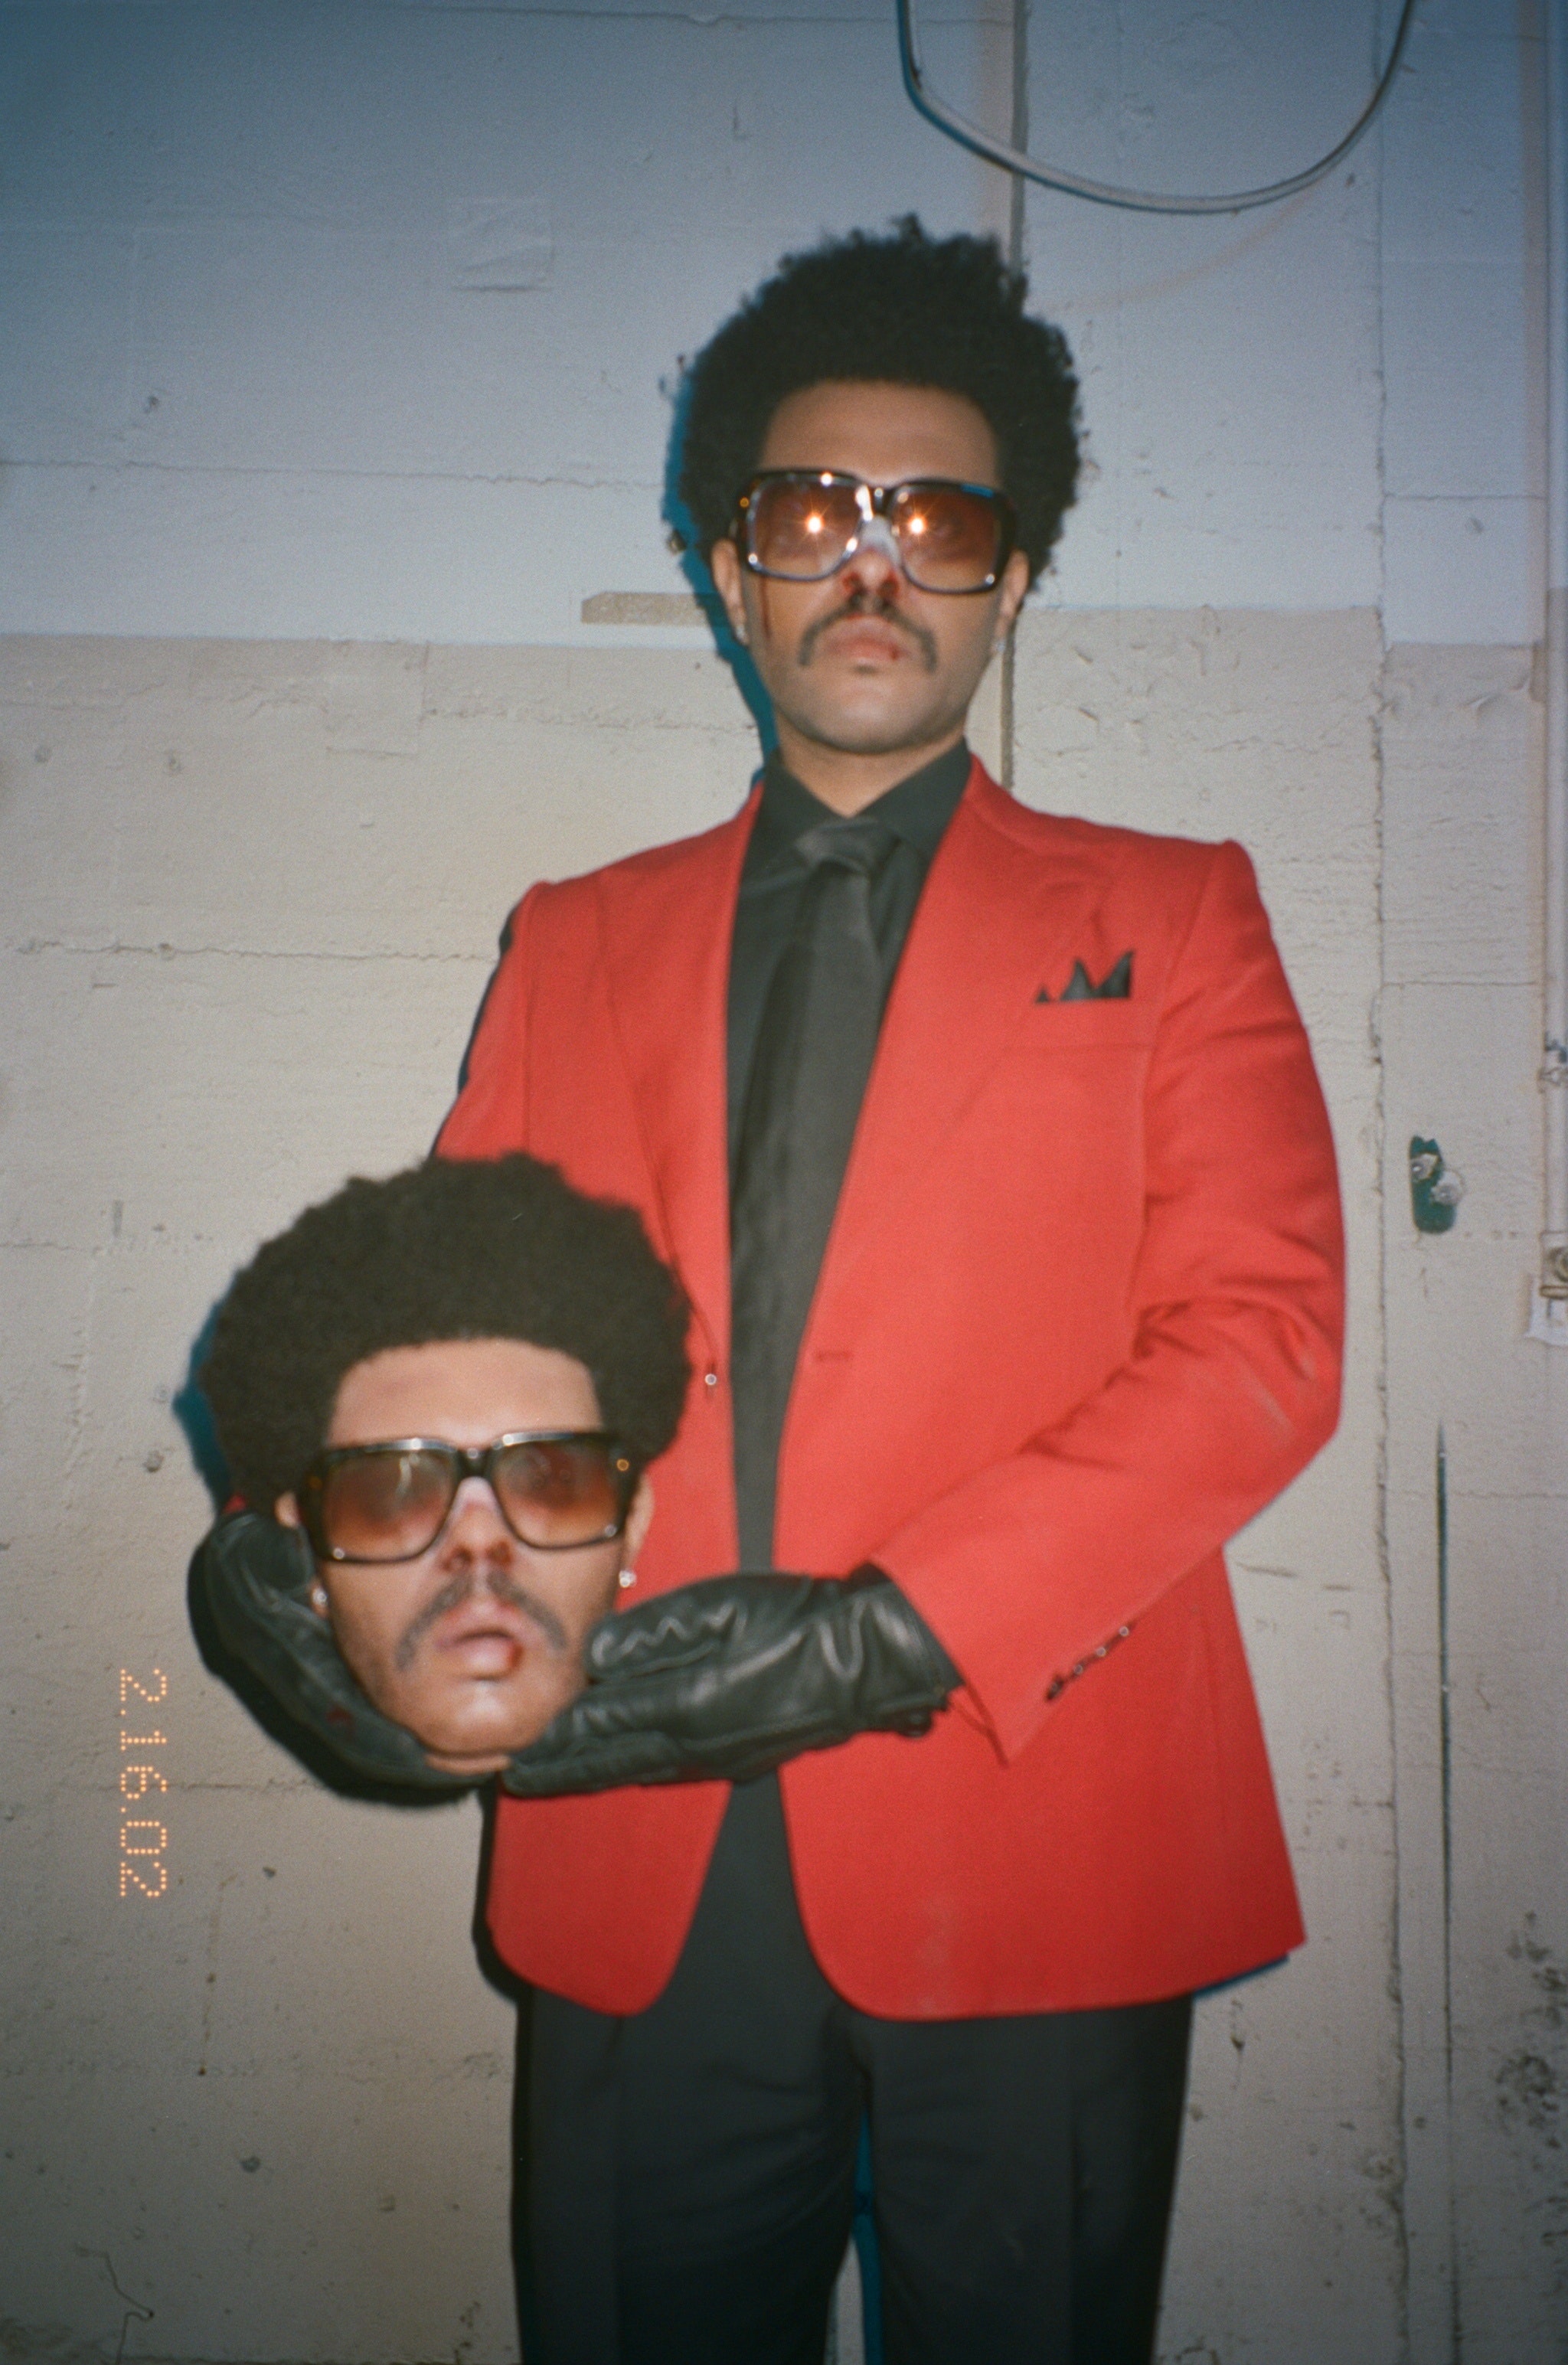 møde Intakt bungee jump The Weeknd News on Twitter: "For everyone that keeps talking about the red  suit, there's something called conception. In the movie 'After Hours', the  whole action develops is in ONE NIGHT, i